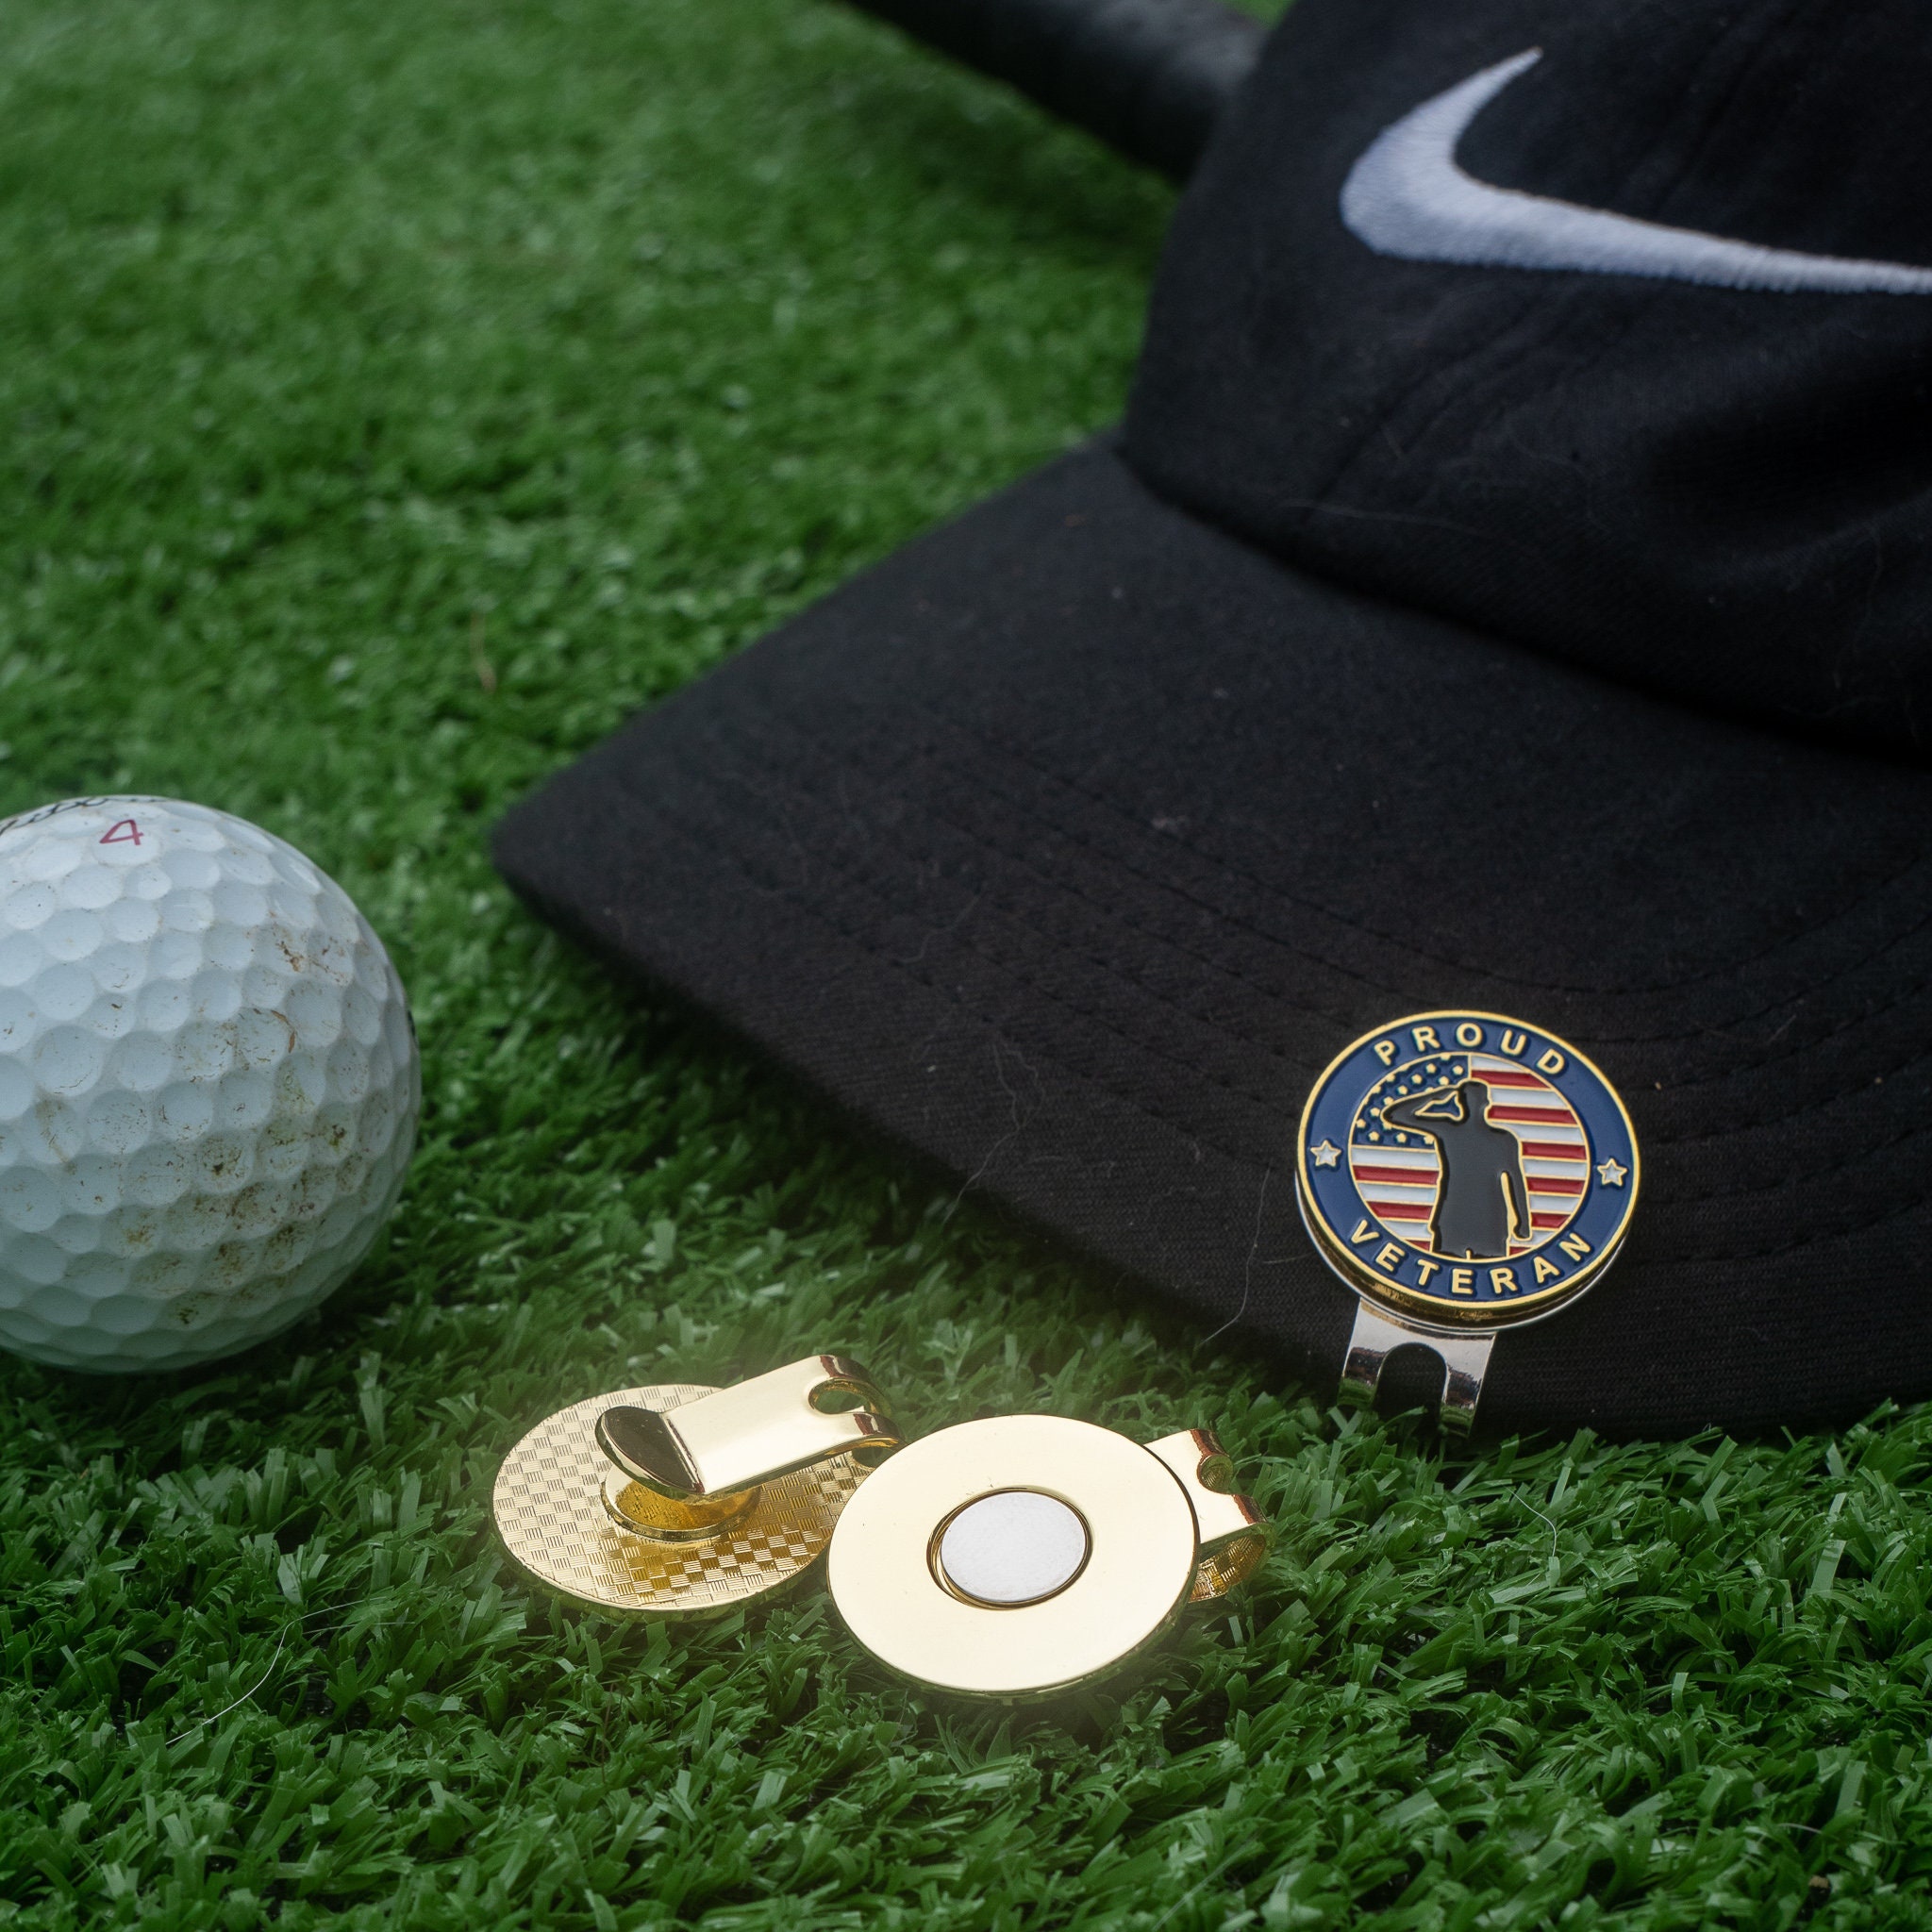 US Army Golf Gift Set with 4 Golf Balls with Army logo and Divot Repair  tool wit